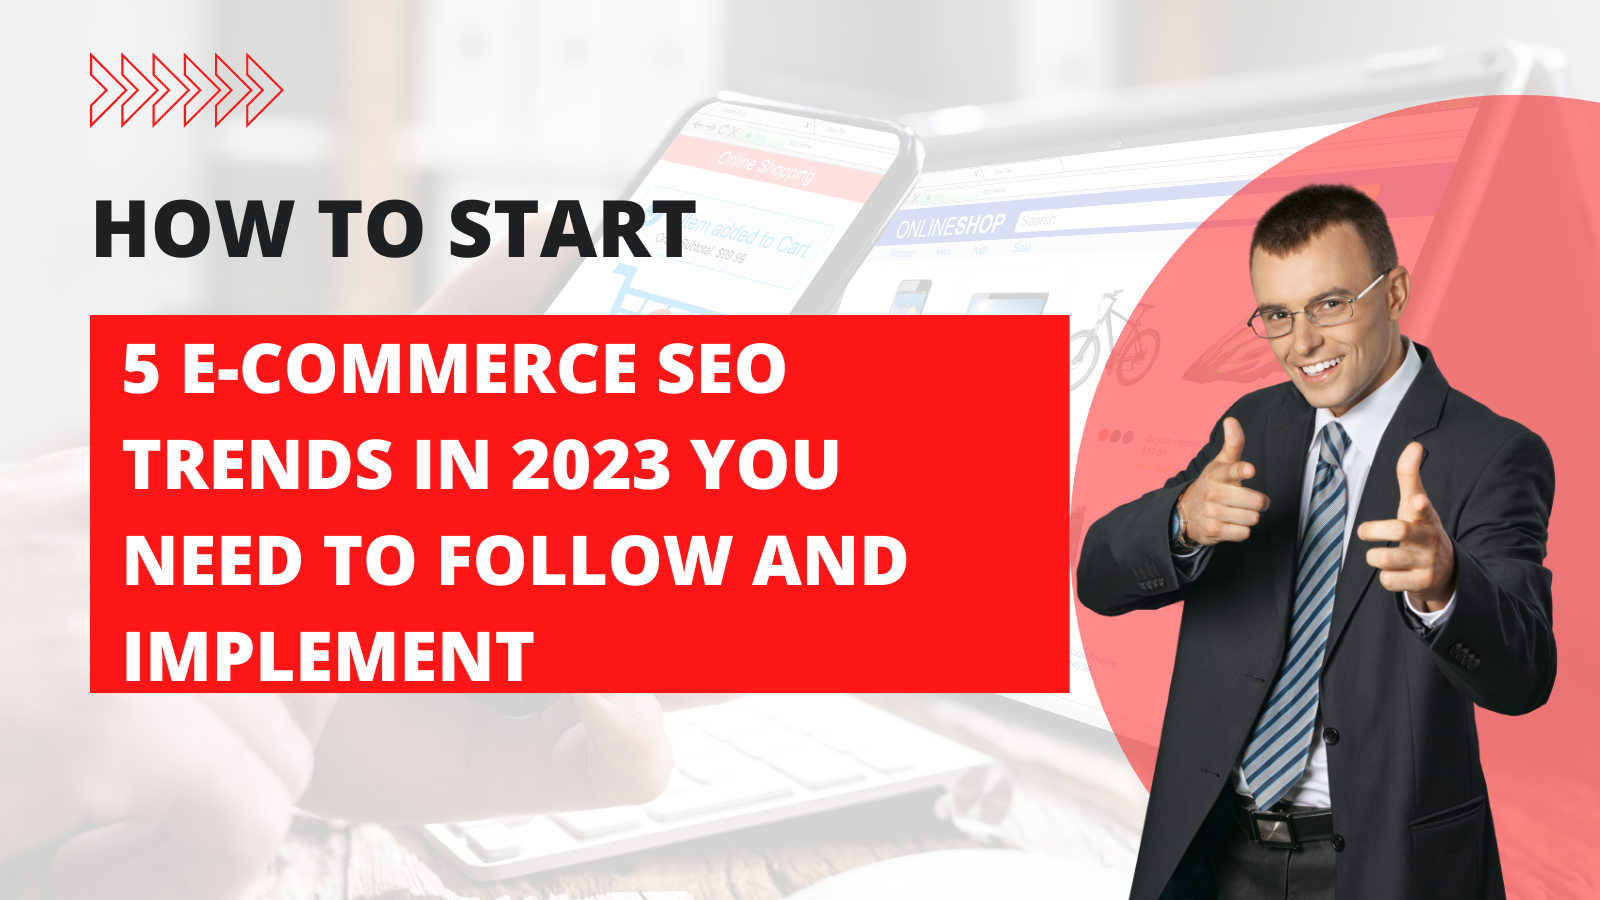 5 E-commerce SEO Trends in 2023 You Need to Follow and Implement